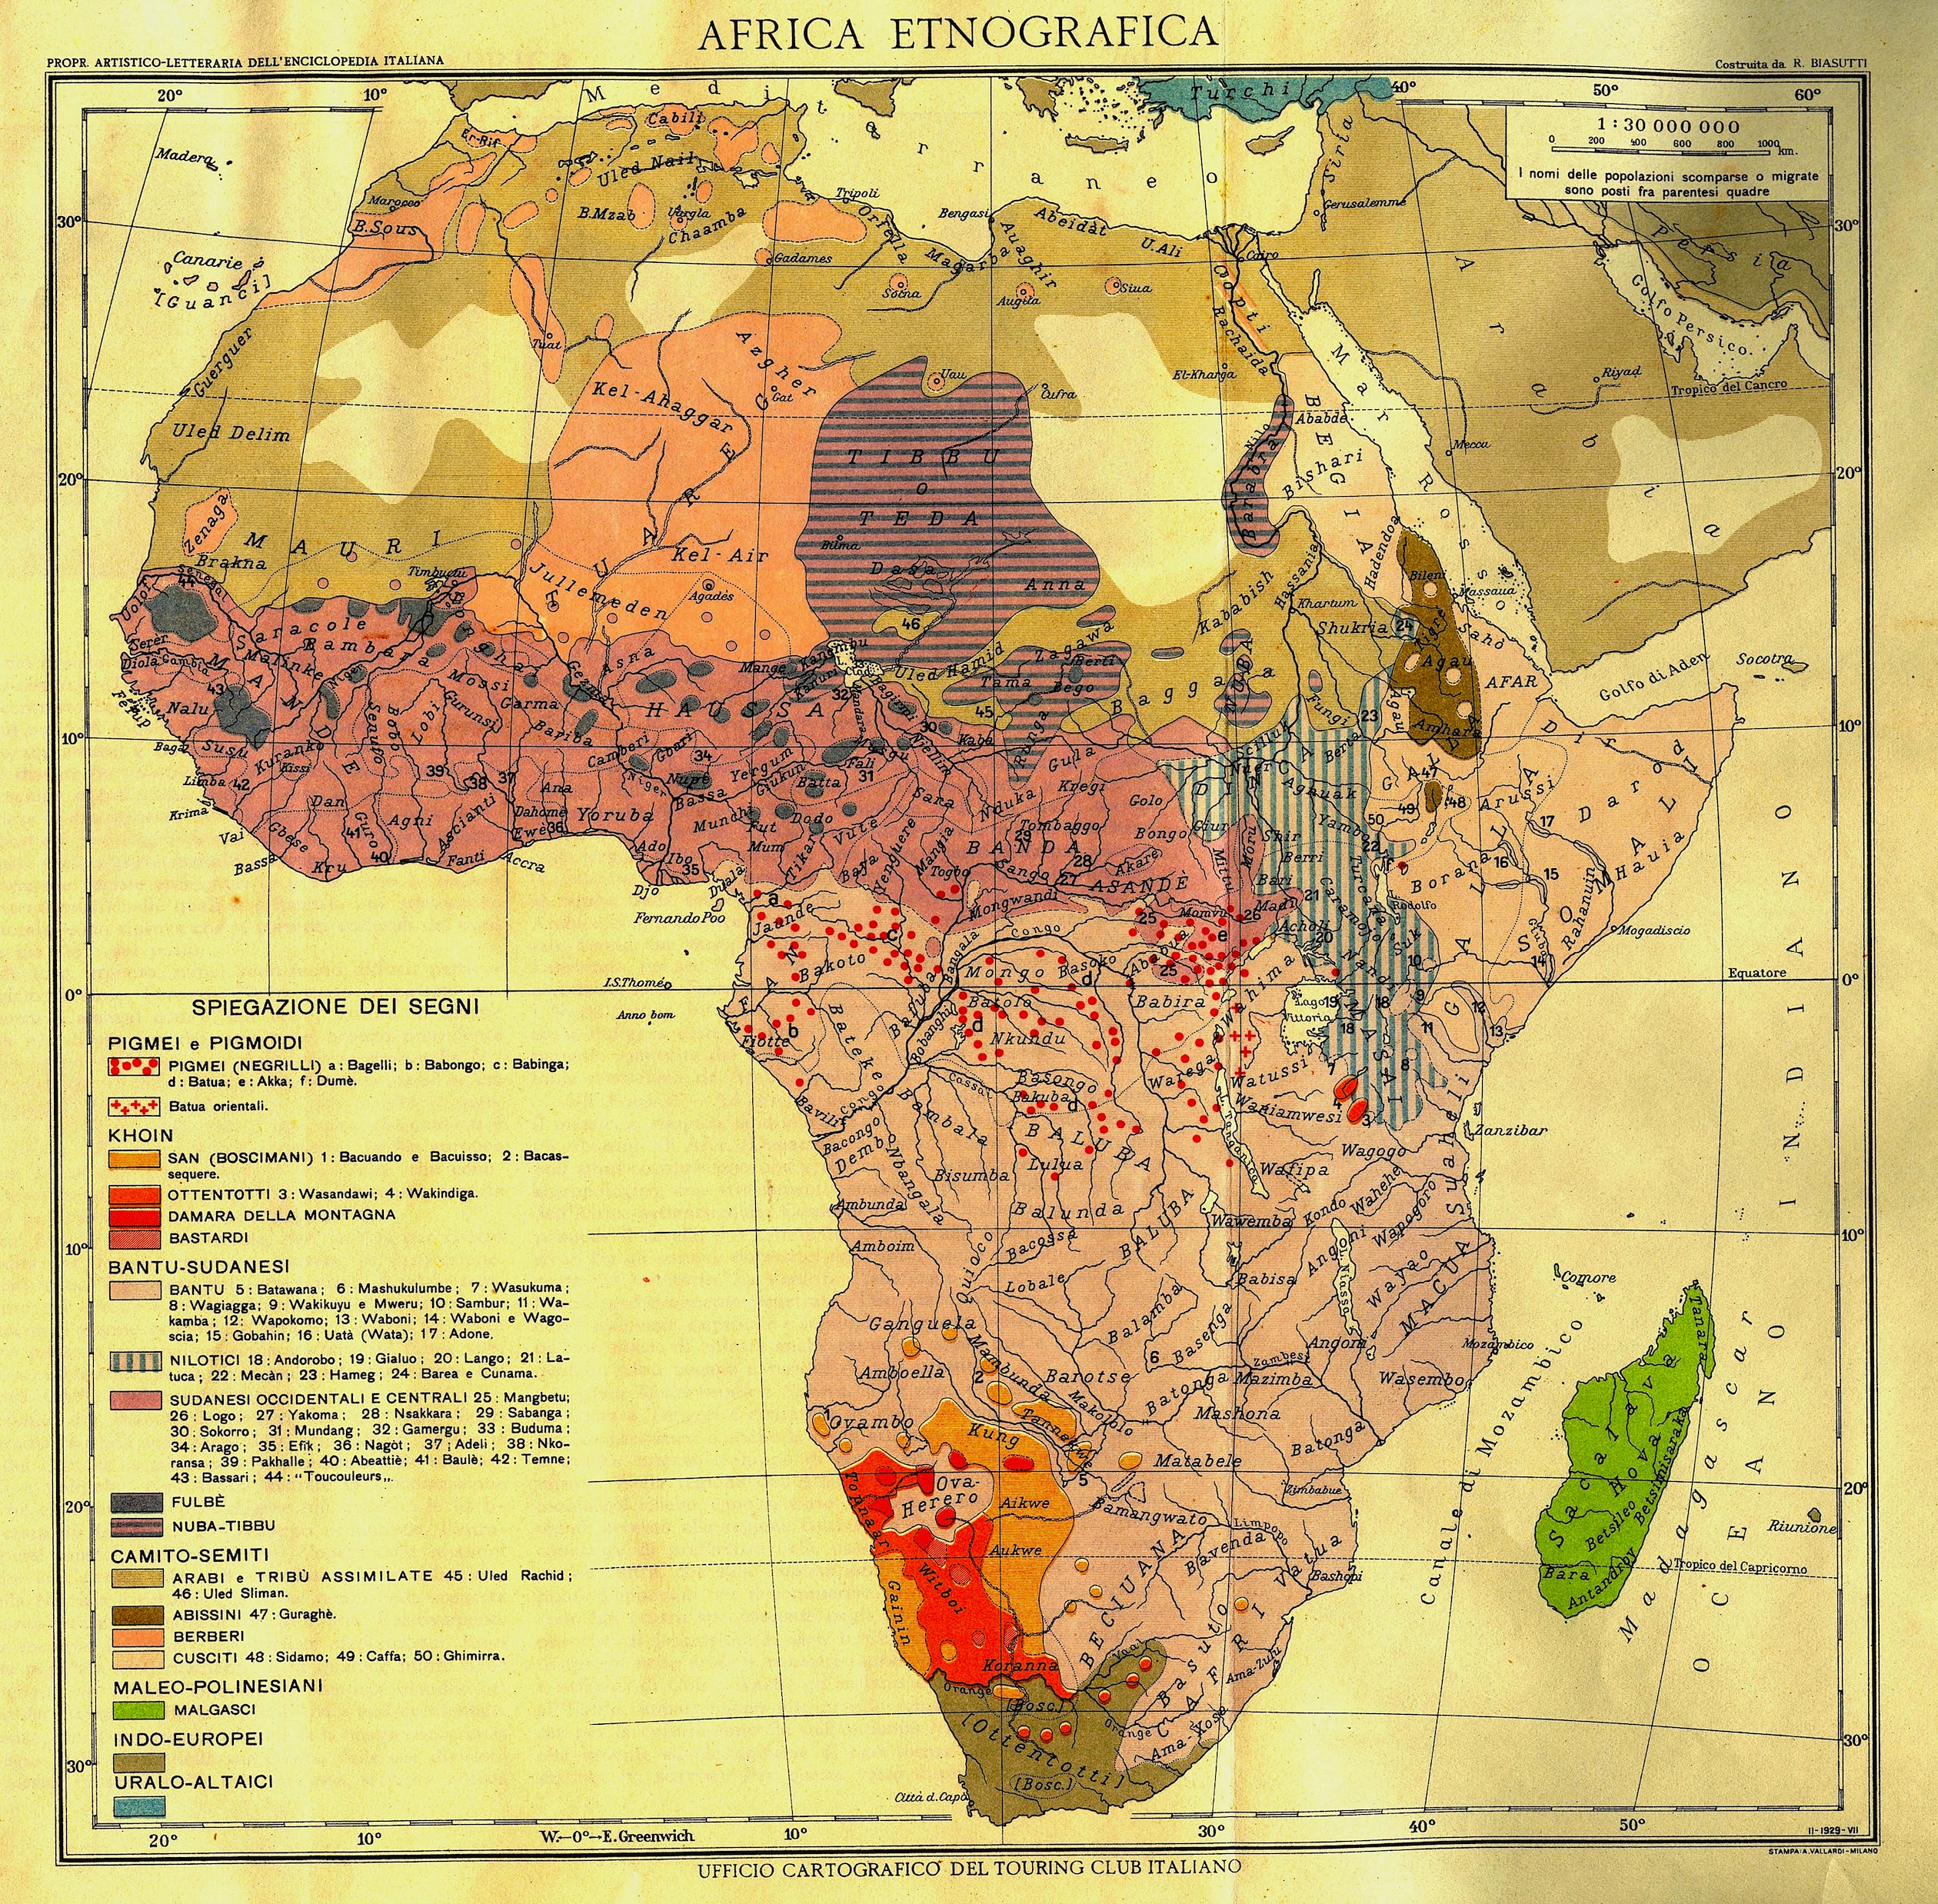 African map of ethnic groups